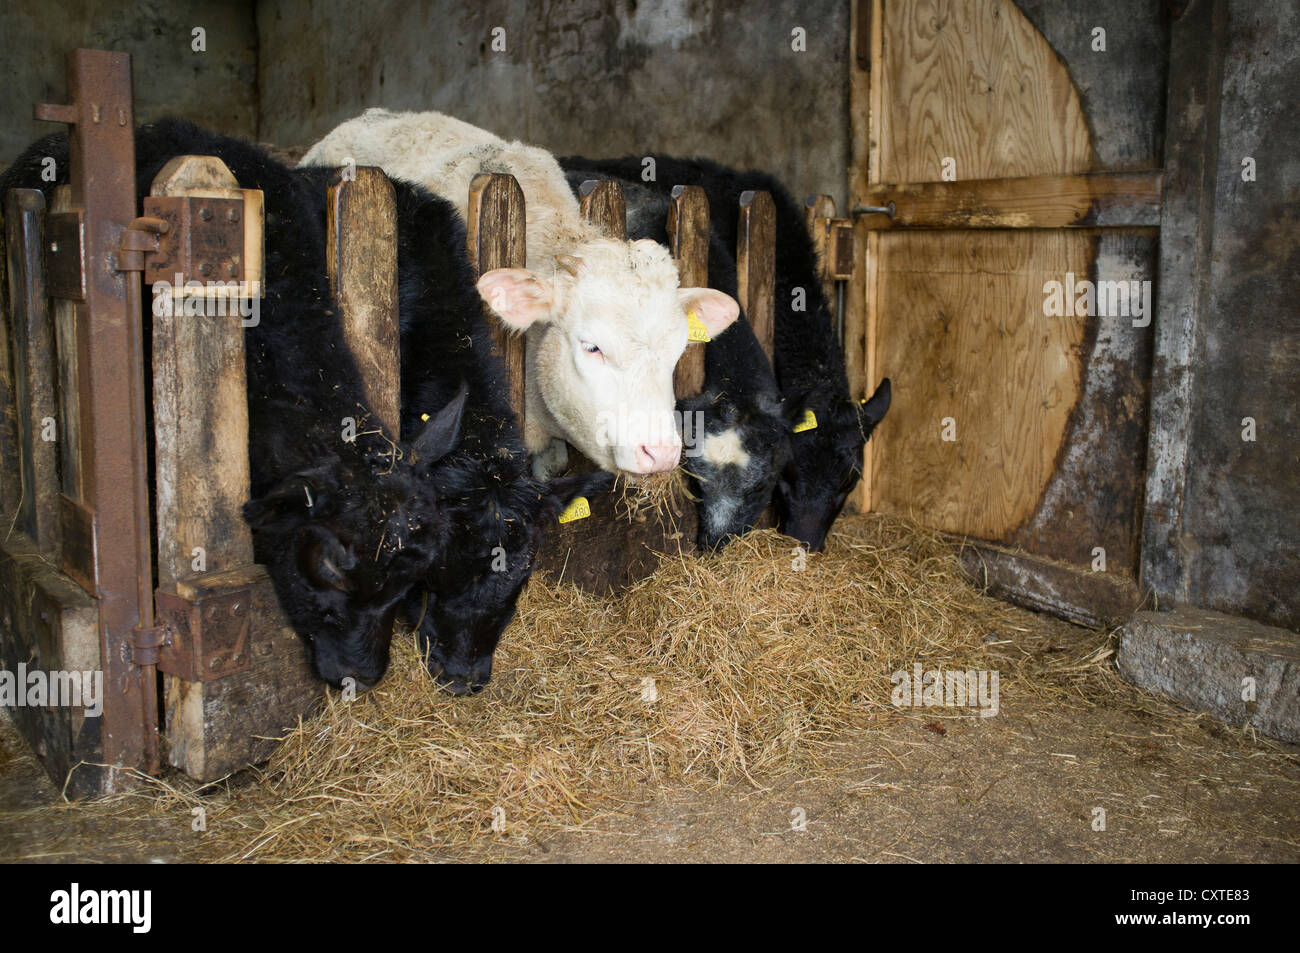 dh Young cows feeding BEEF UK Cattle eating Silage hay barn indoors uk farm shelter scotland livestock scottish farming animal buildings inside shed Stock Photo